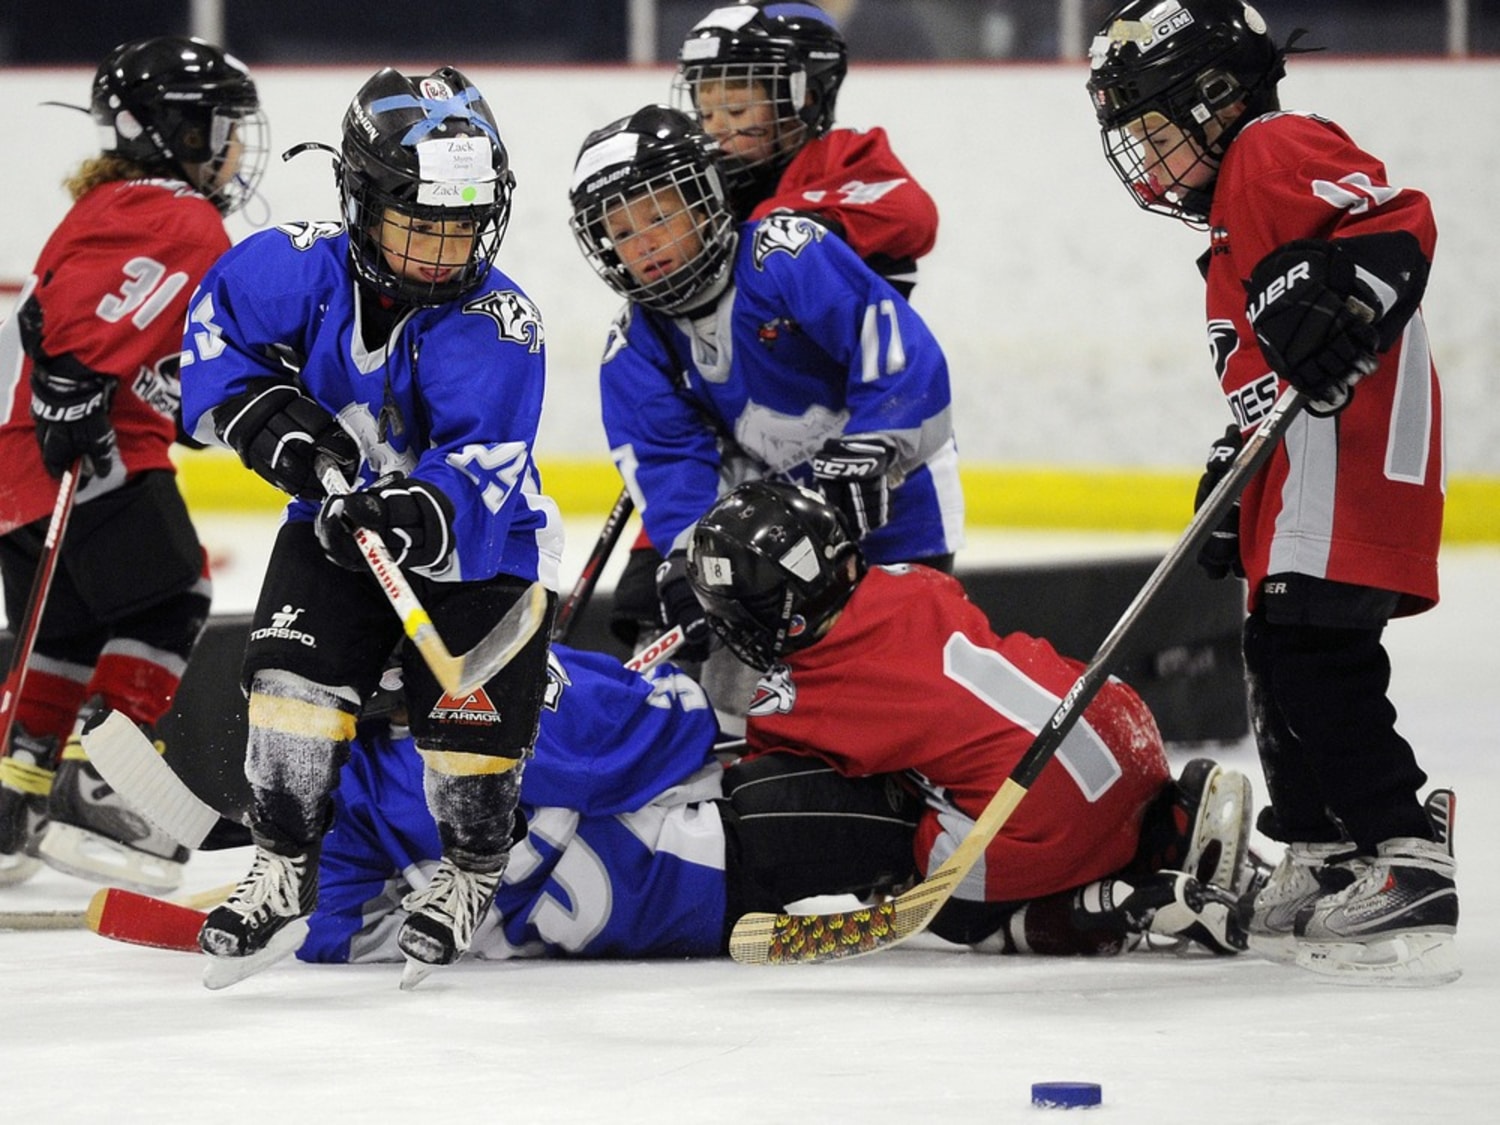 Opinion Youth hockey injuries border on child abuse